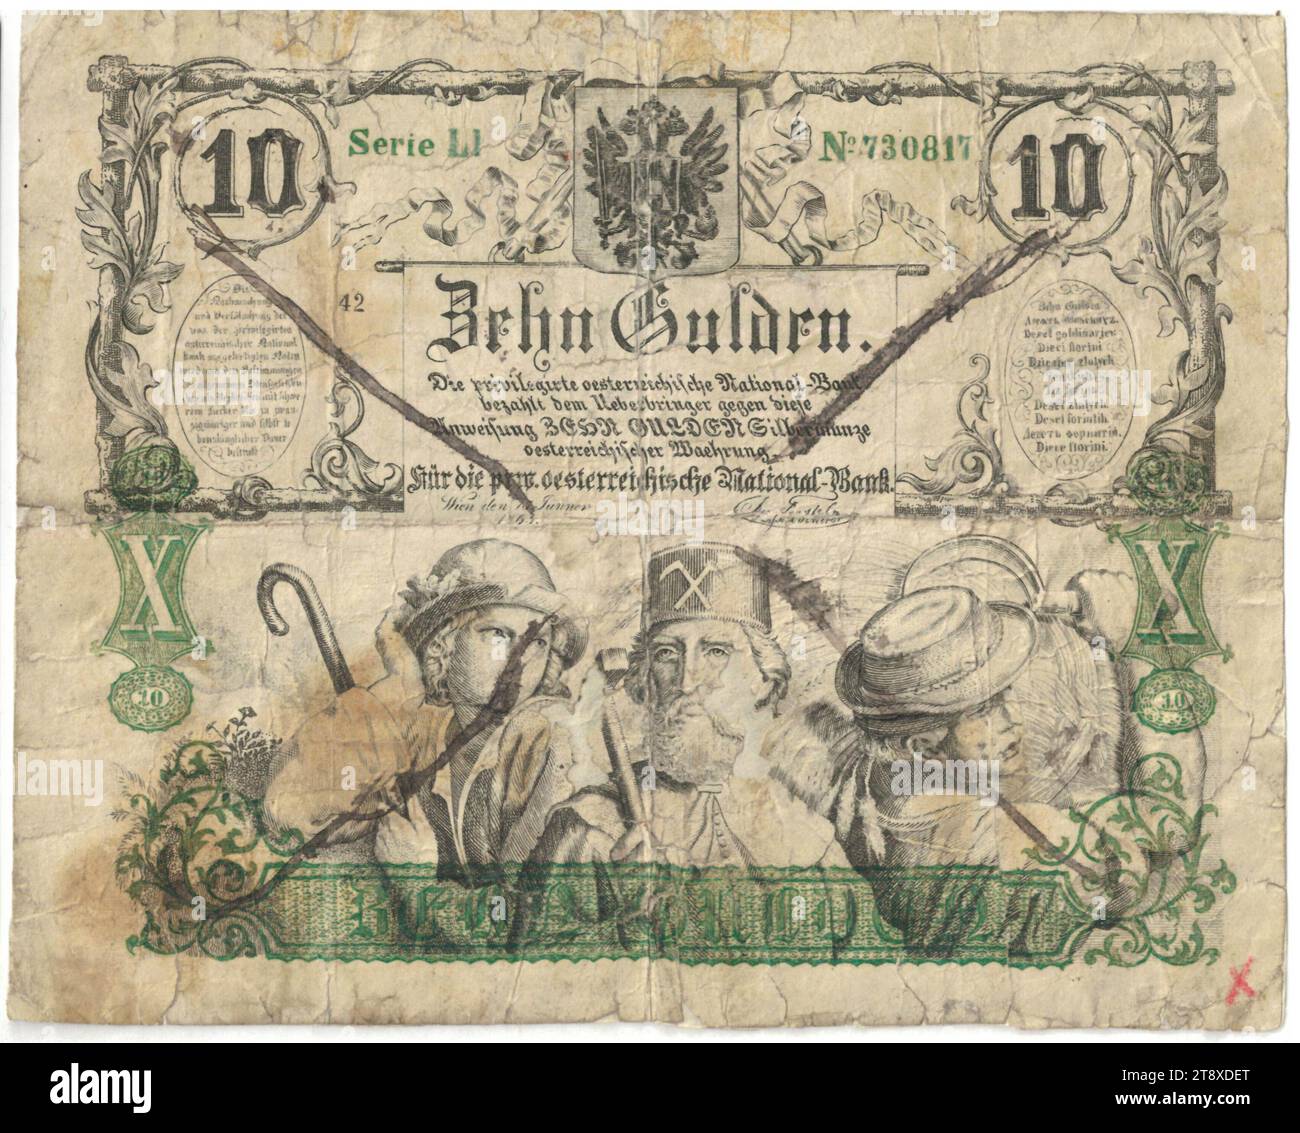 Banknote (forgery), 10 florins, Privilegierte Österreichische National-Bank, mint authority, Date after 15.01.1863, paper, printing, width 141 mm, height 114 mm, Mint, Vienna, Mint territory, Austria, Empire (1804-1867), Finance, counterfeit, forgery, farmers, working class, laborers, coat of arms (as symbol of the state, etc.), bank-note, money, The Vienna Collection Stock Photo